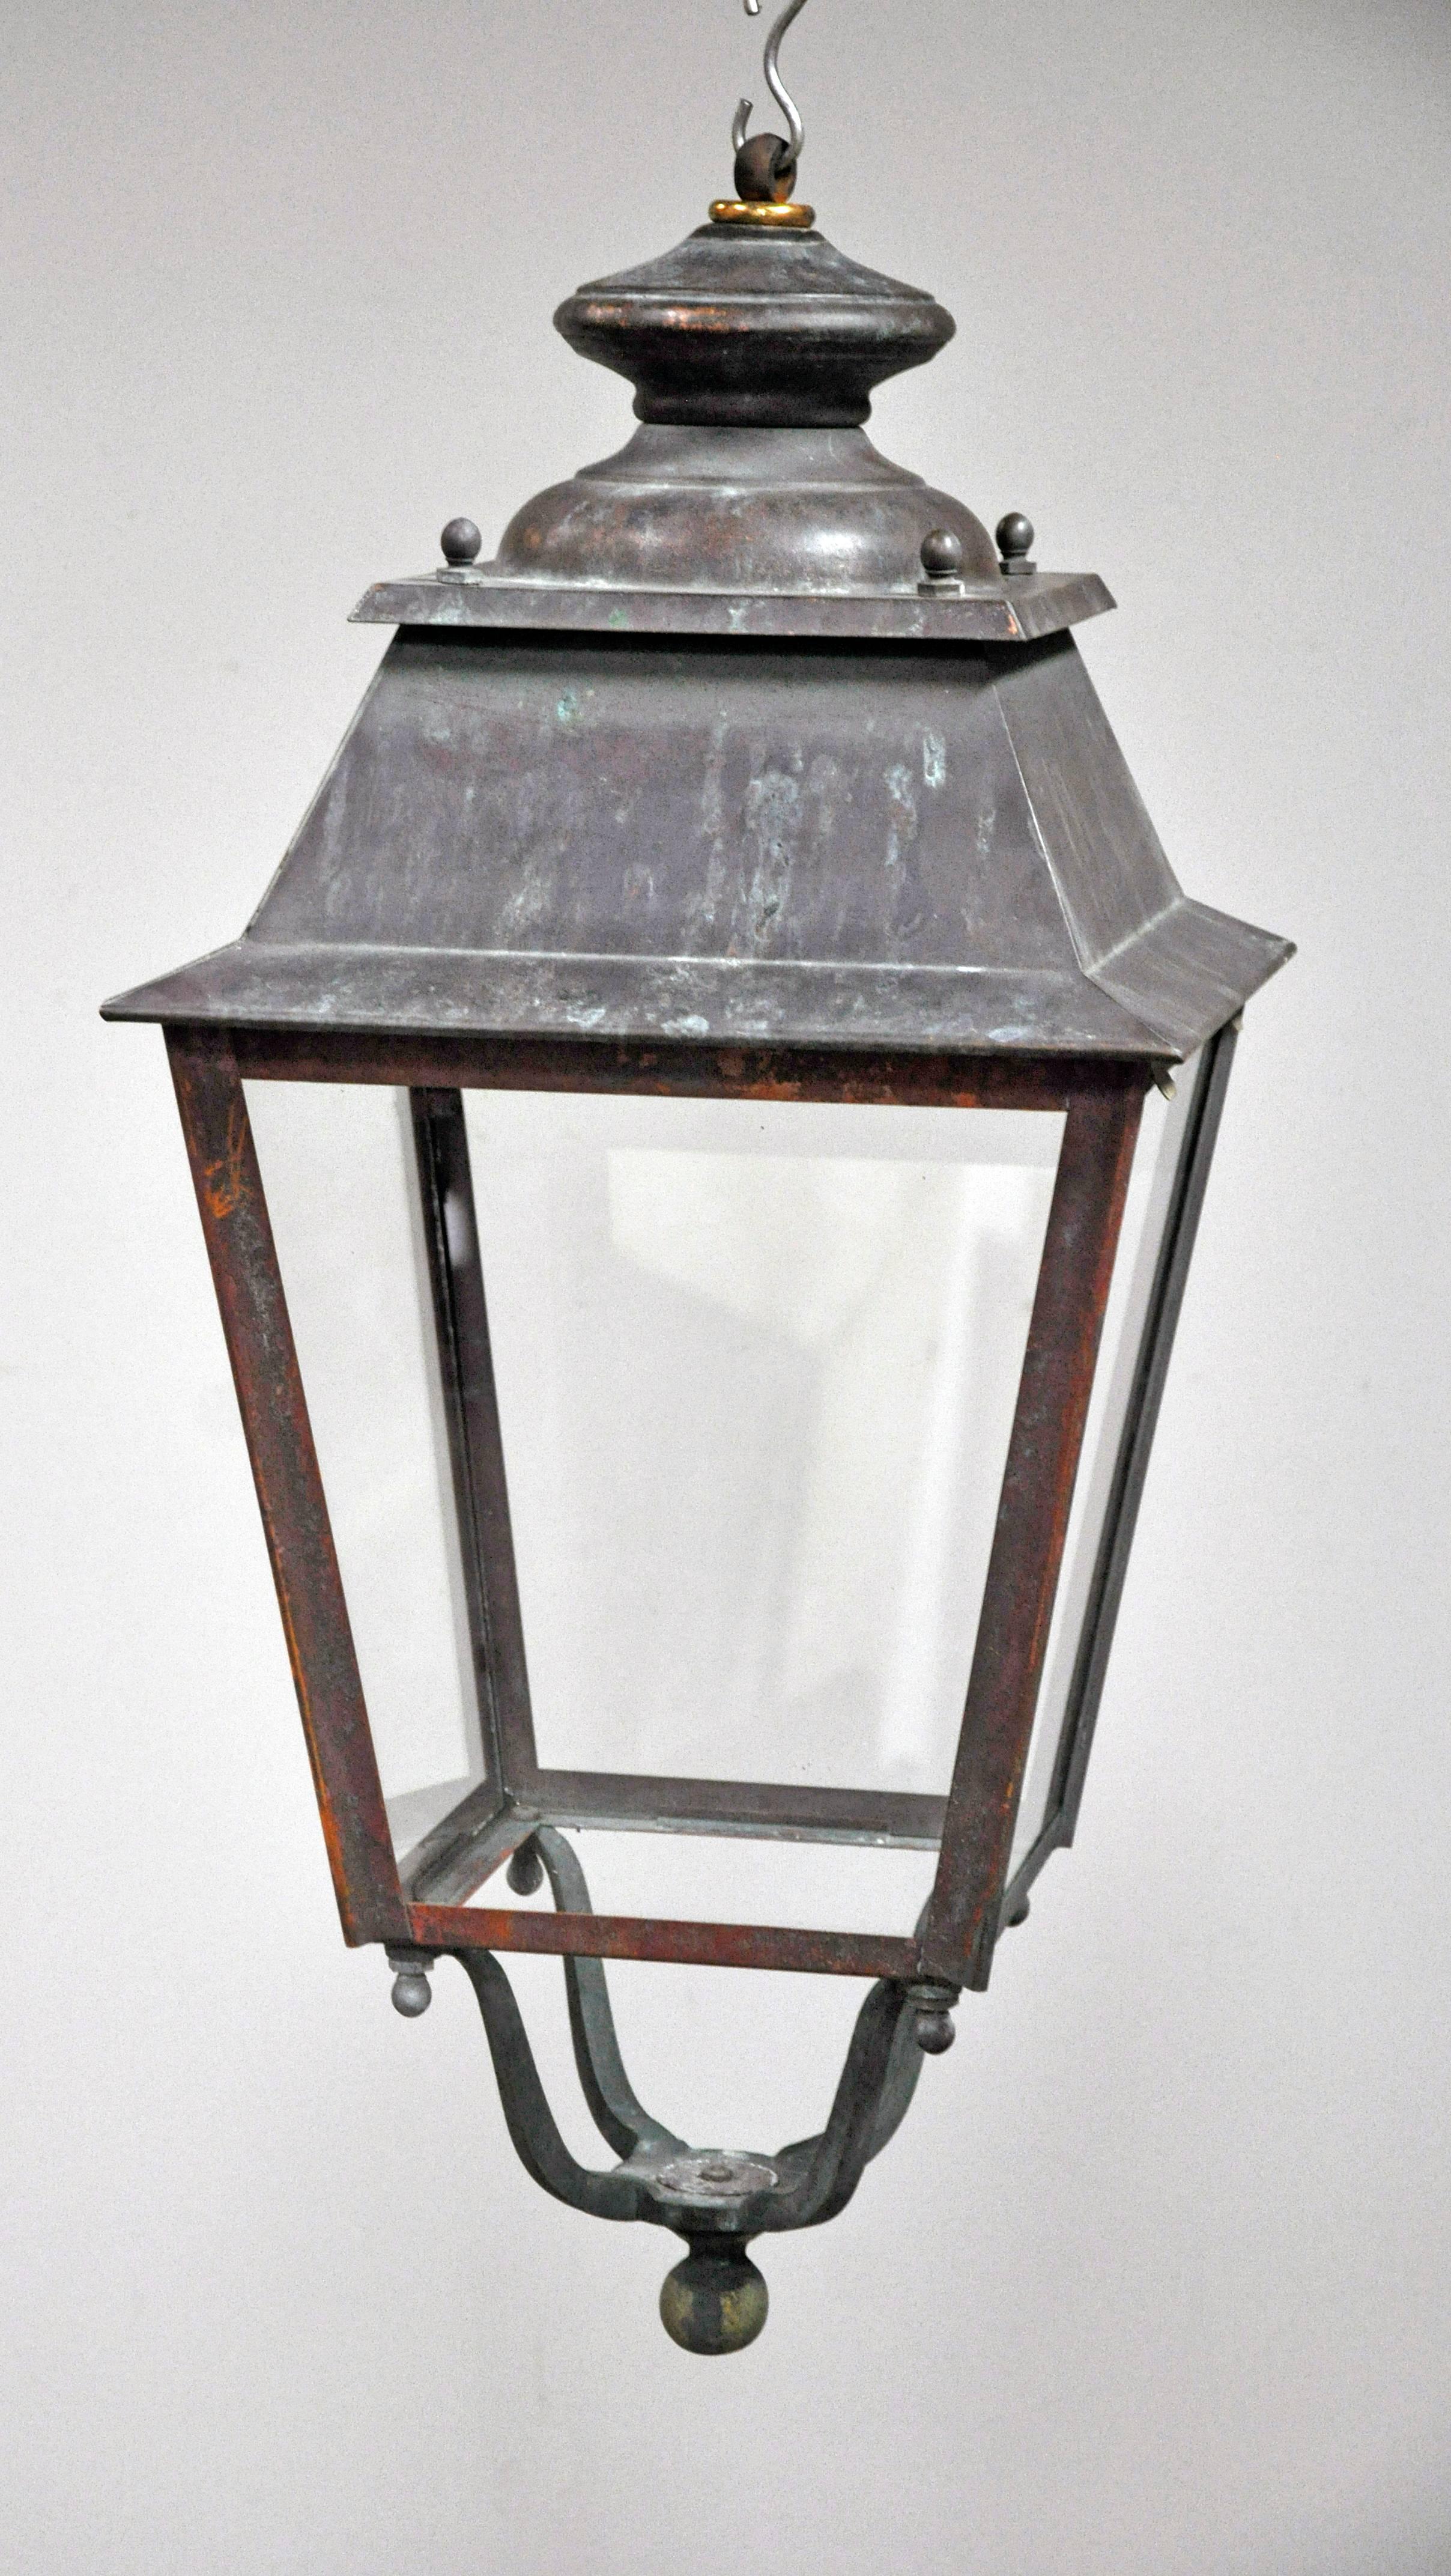 French Provincial Old French Lantern in Copper and Iron